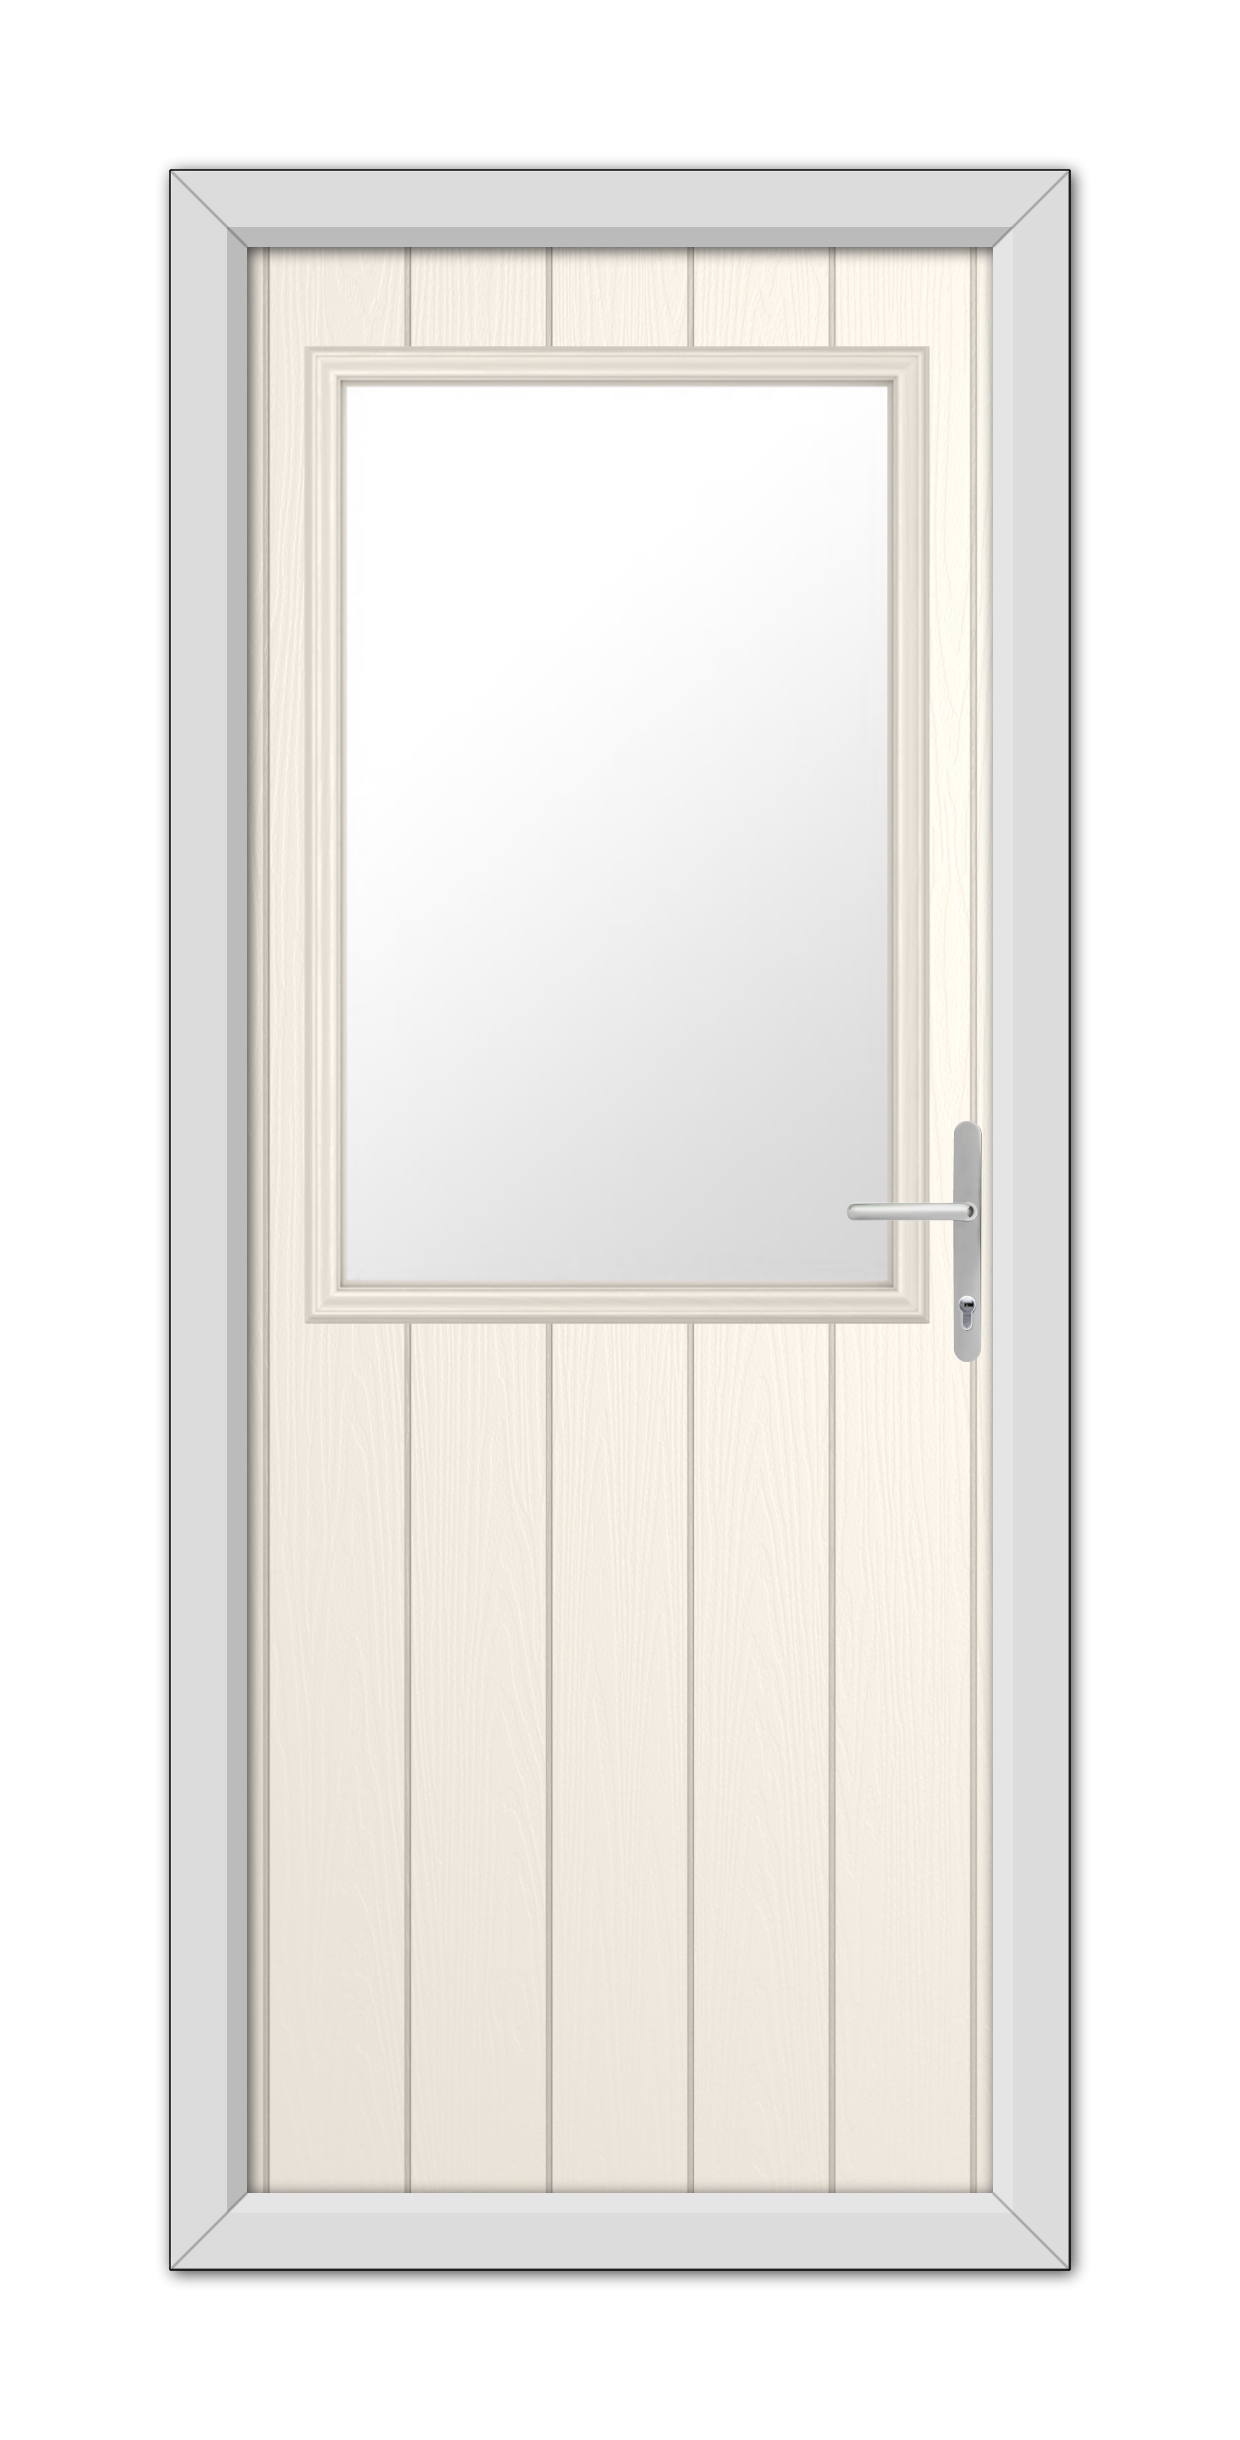 A modern White Foil Clifton Composite Door 48mm Timber Core fitted with a metal handle and a glass panel, set within a gray frame.